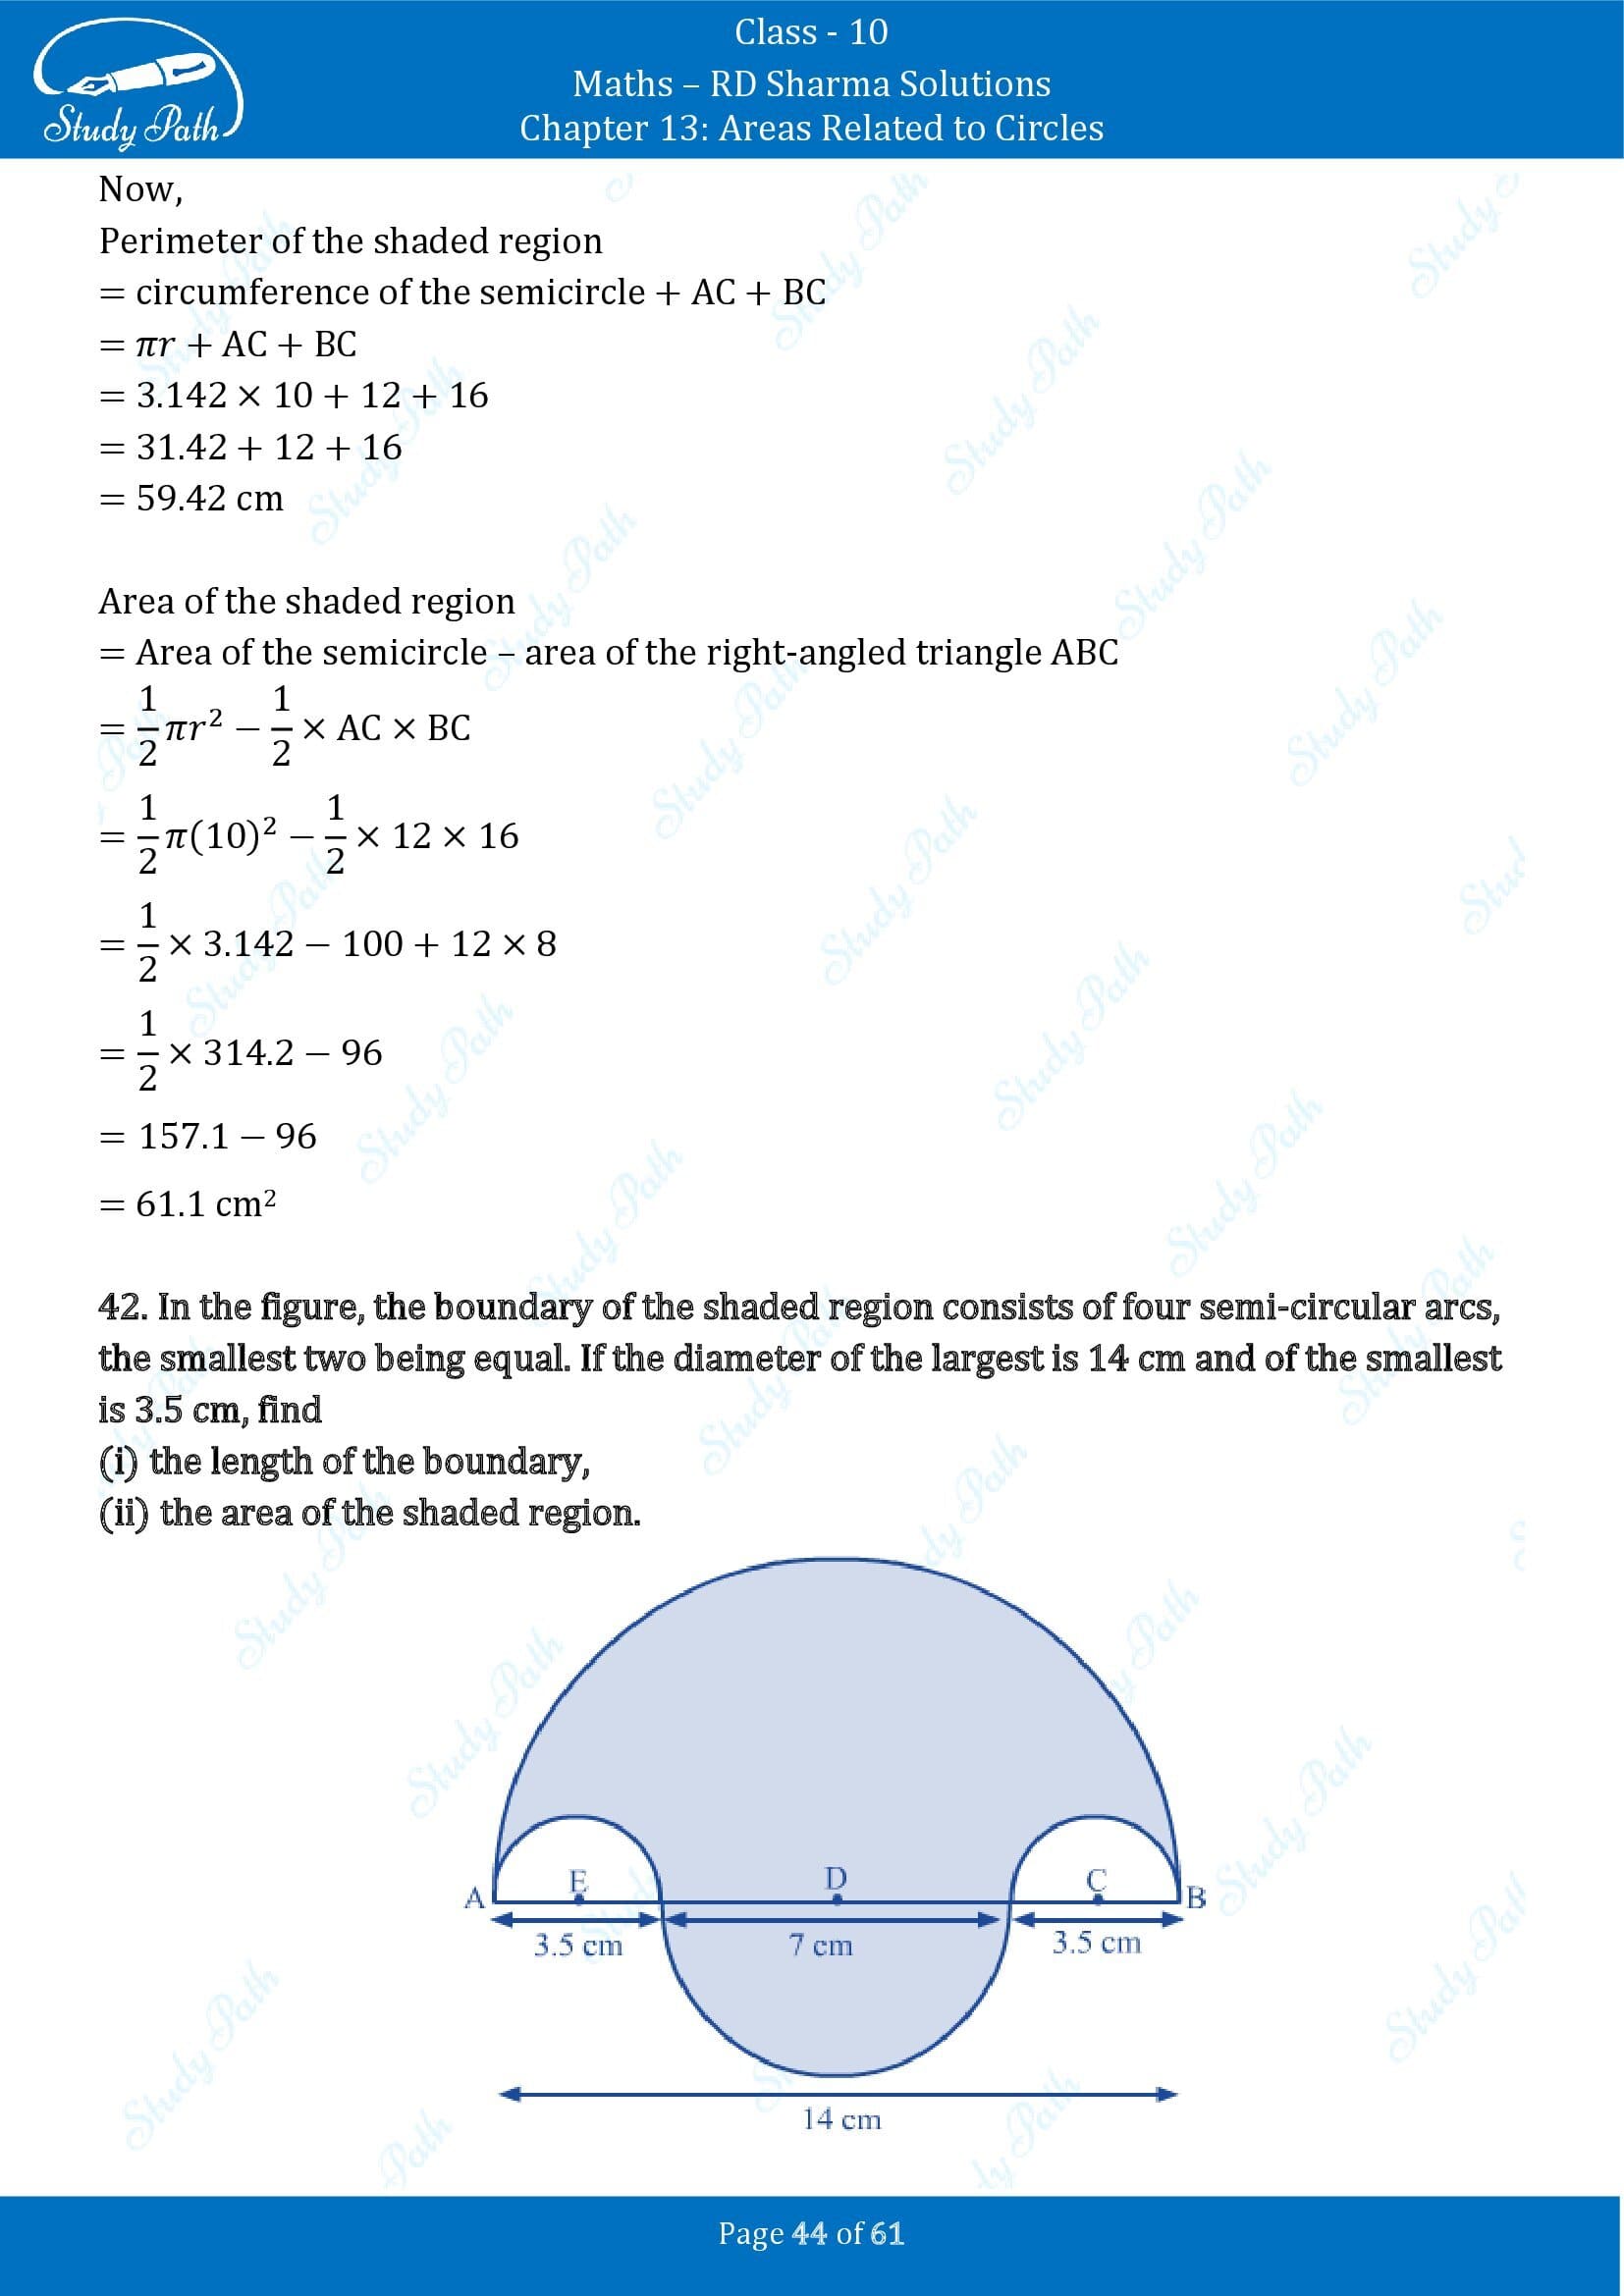 RD Sharma Solutions Class 10 Chapter 13 Areas Related to Circles Exercise 13.4 00044